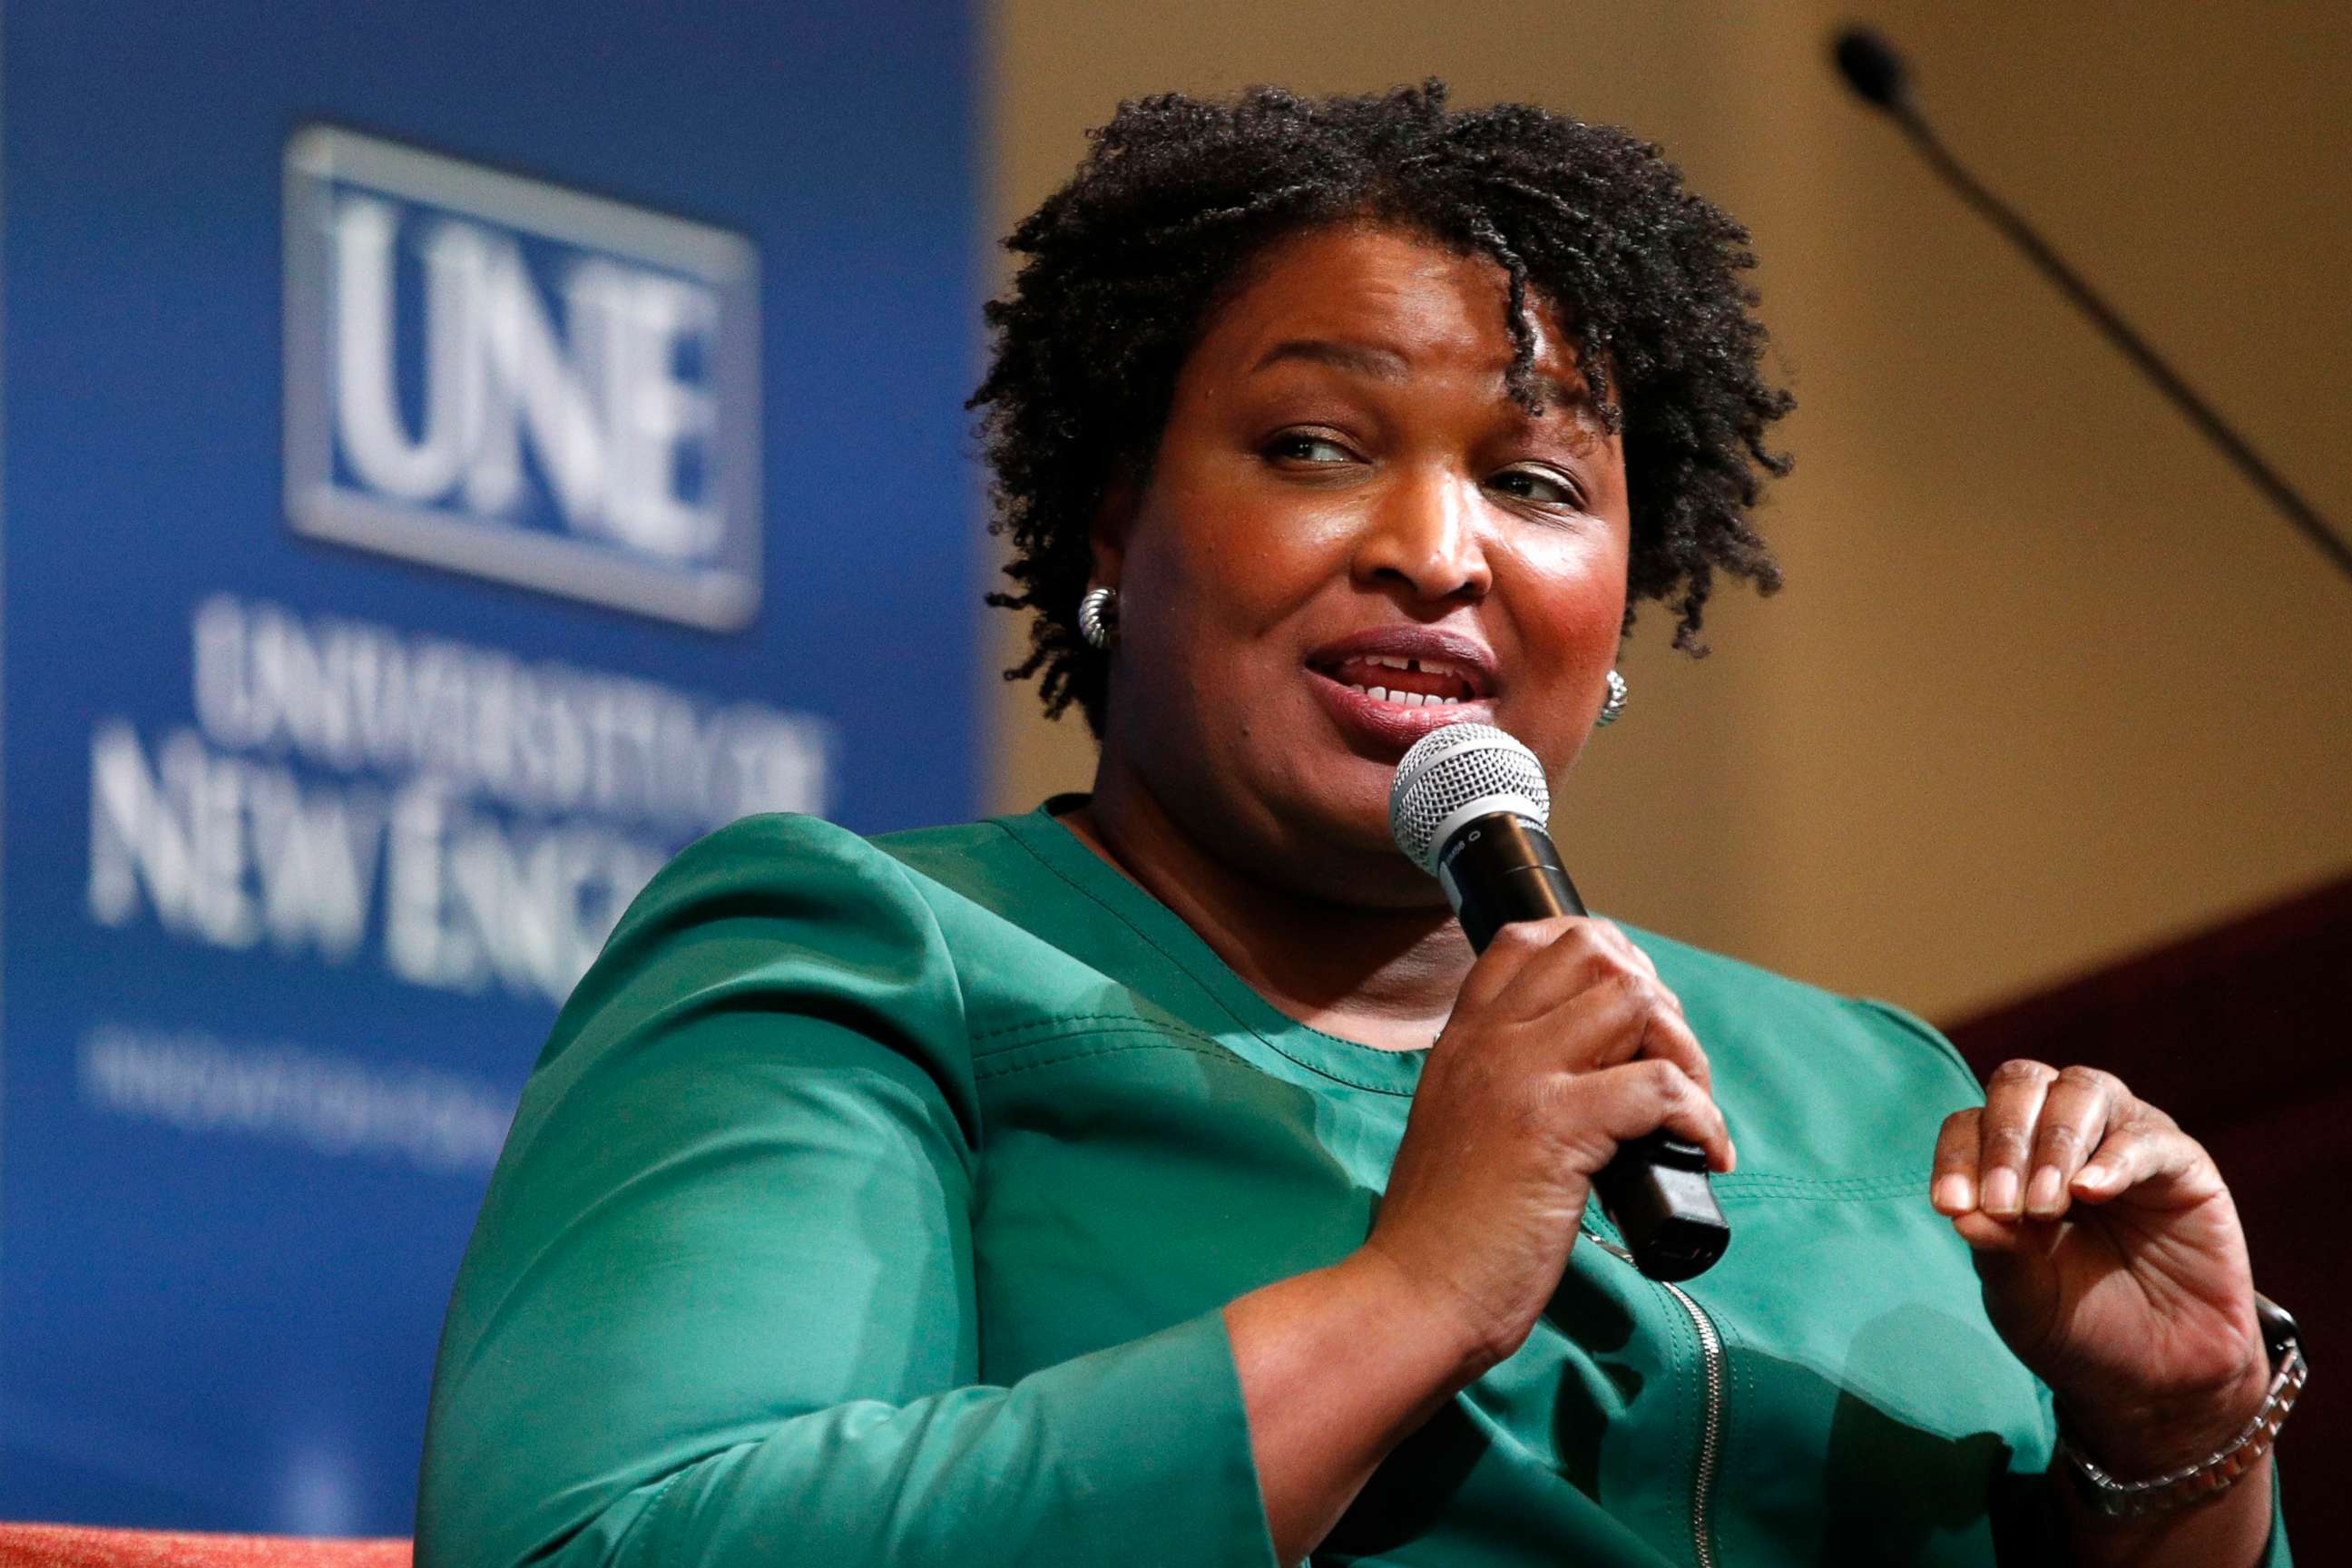 PHOTO: Stacey Abrams speaks at the University of New England, Jan. 22, 2020, in Portland, Maine.